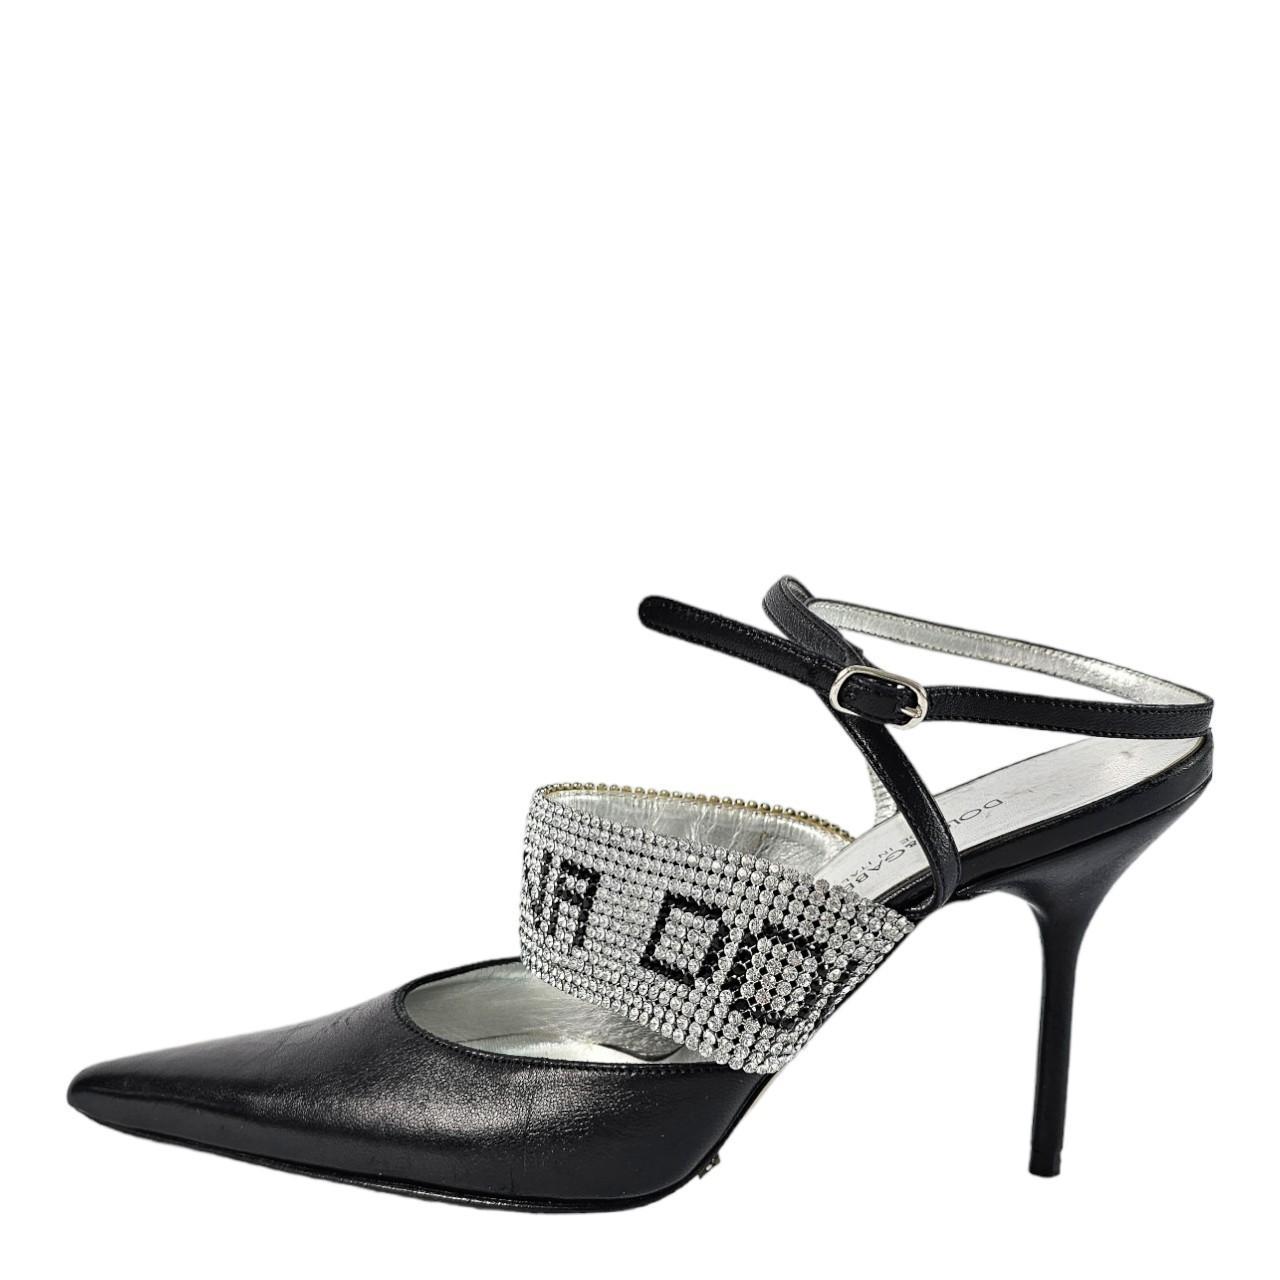 Dolce & Gabbana Women's Black and Silver Courts - 6